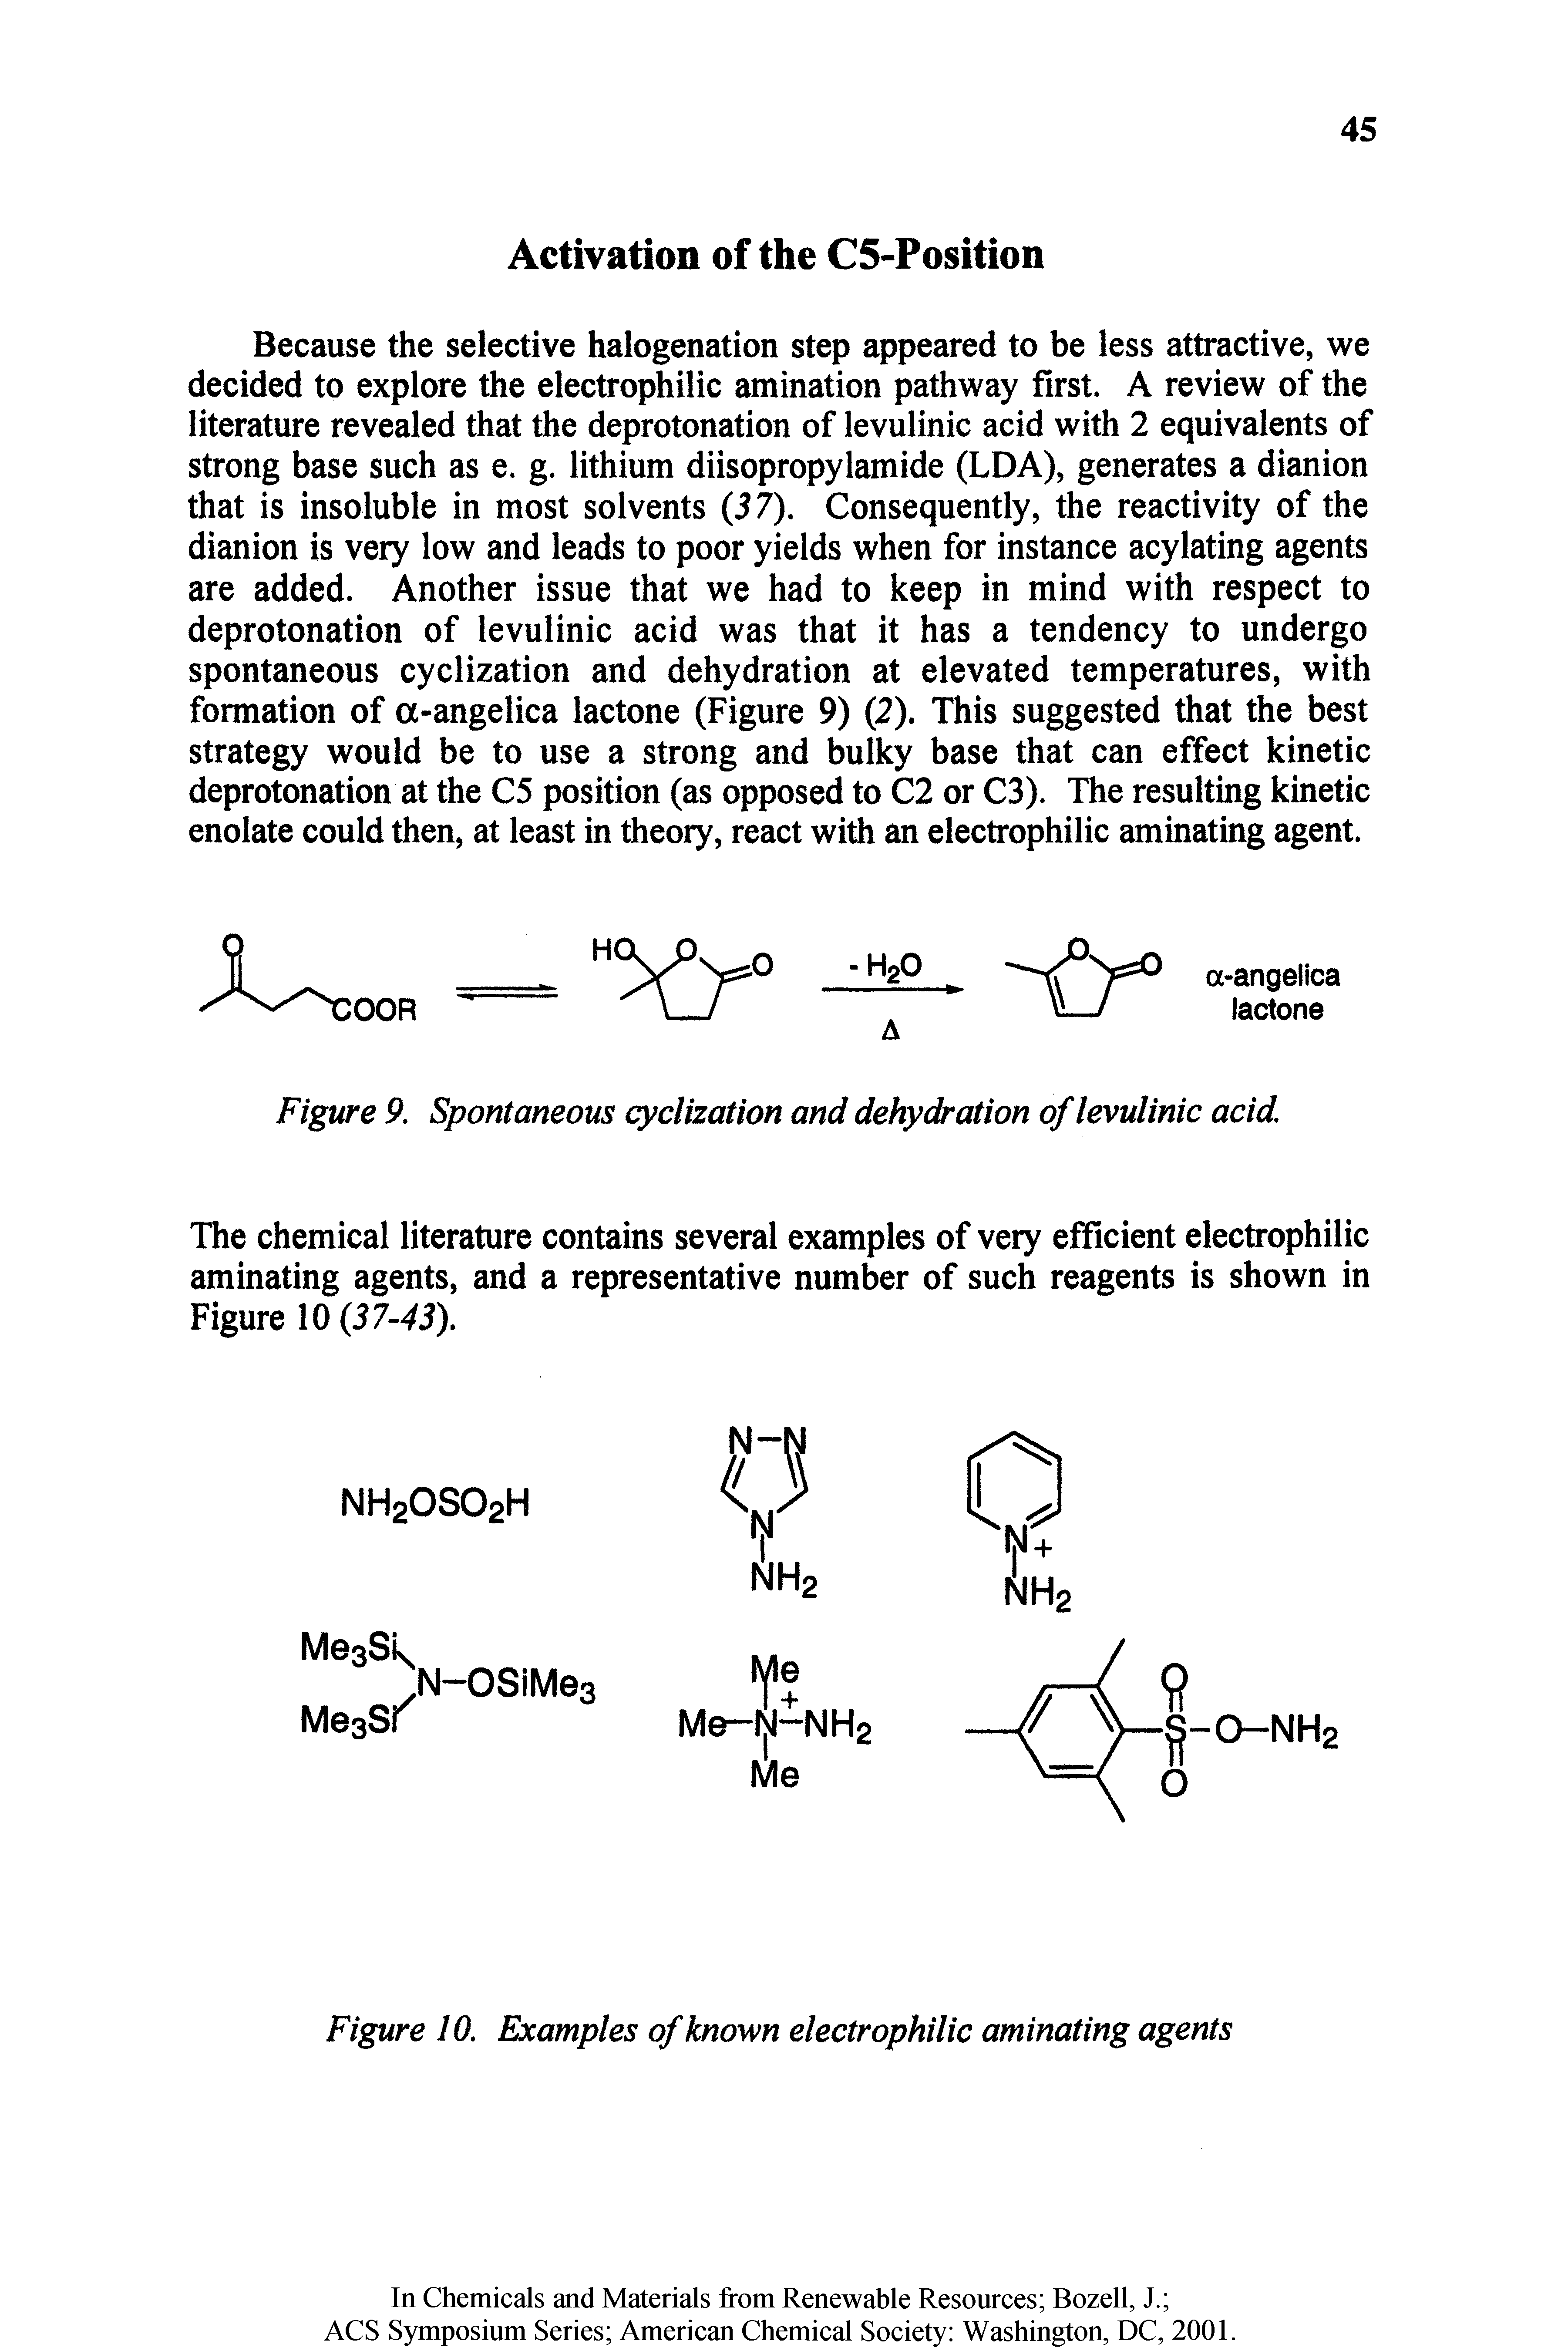 Figure 10, Examples of known electrophilic aminating agents...